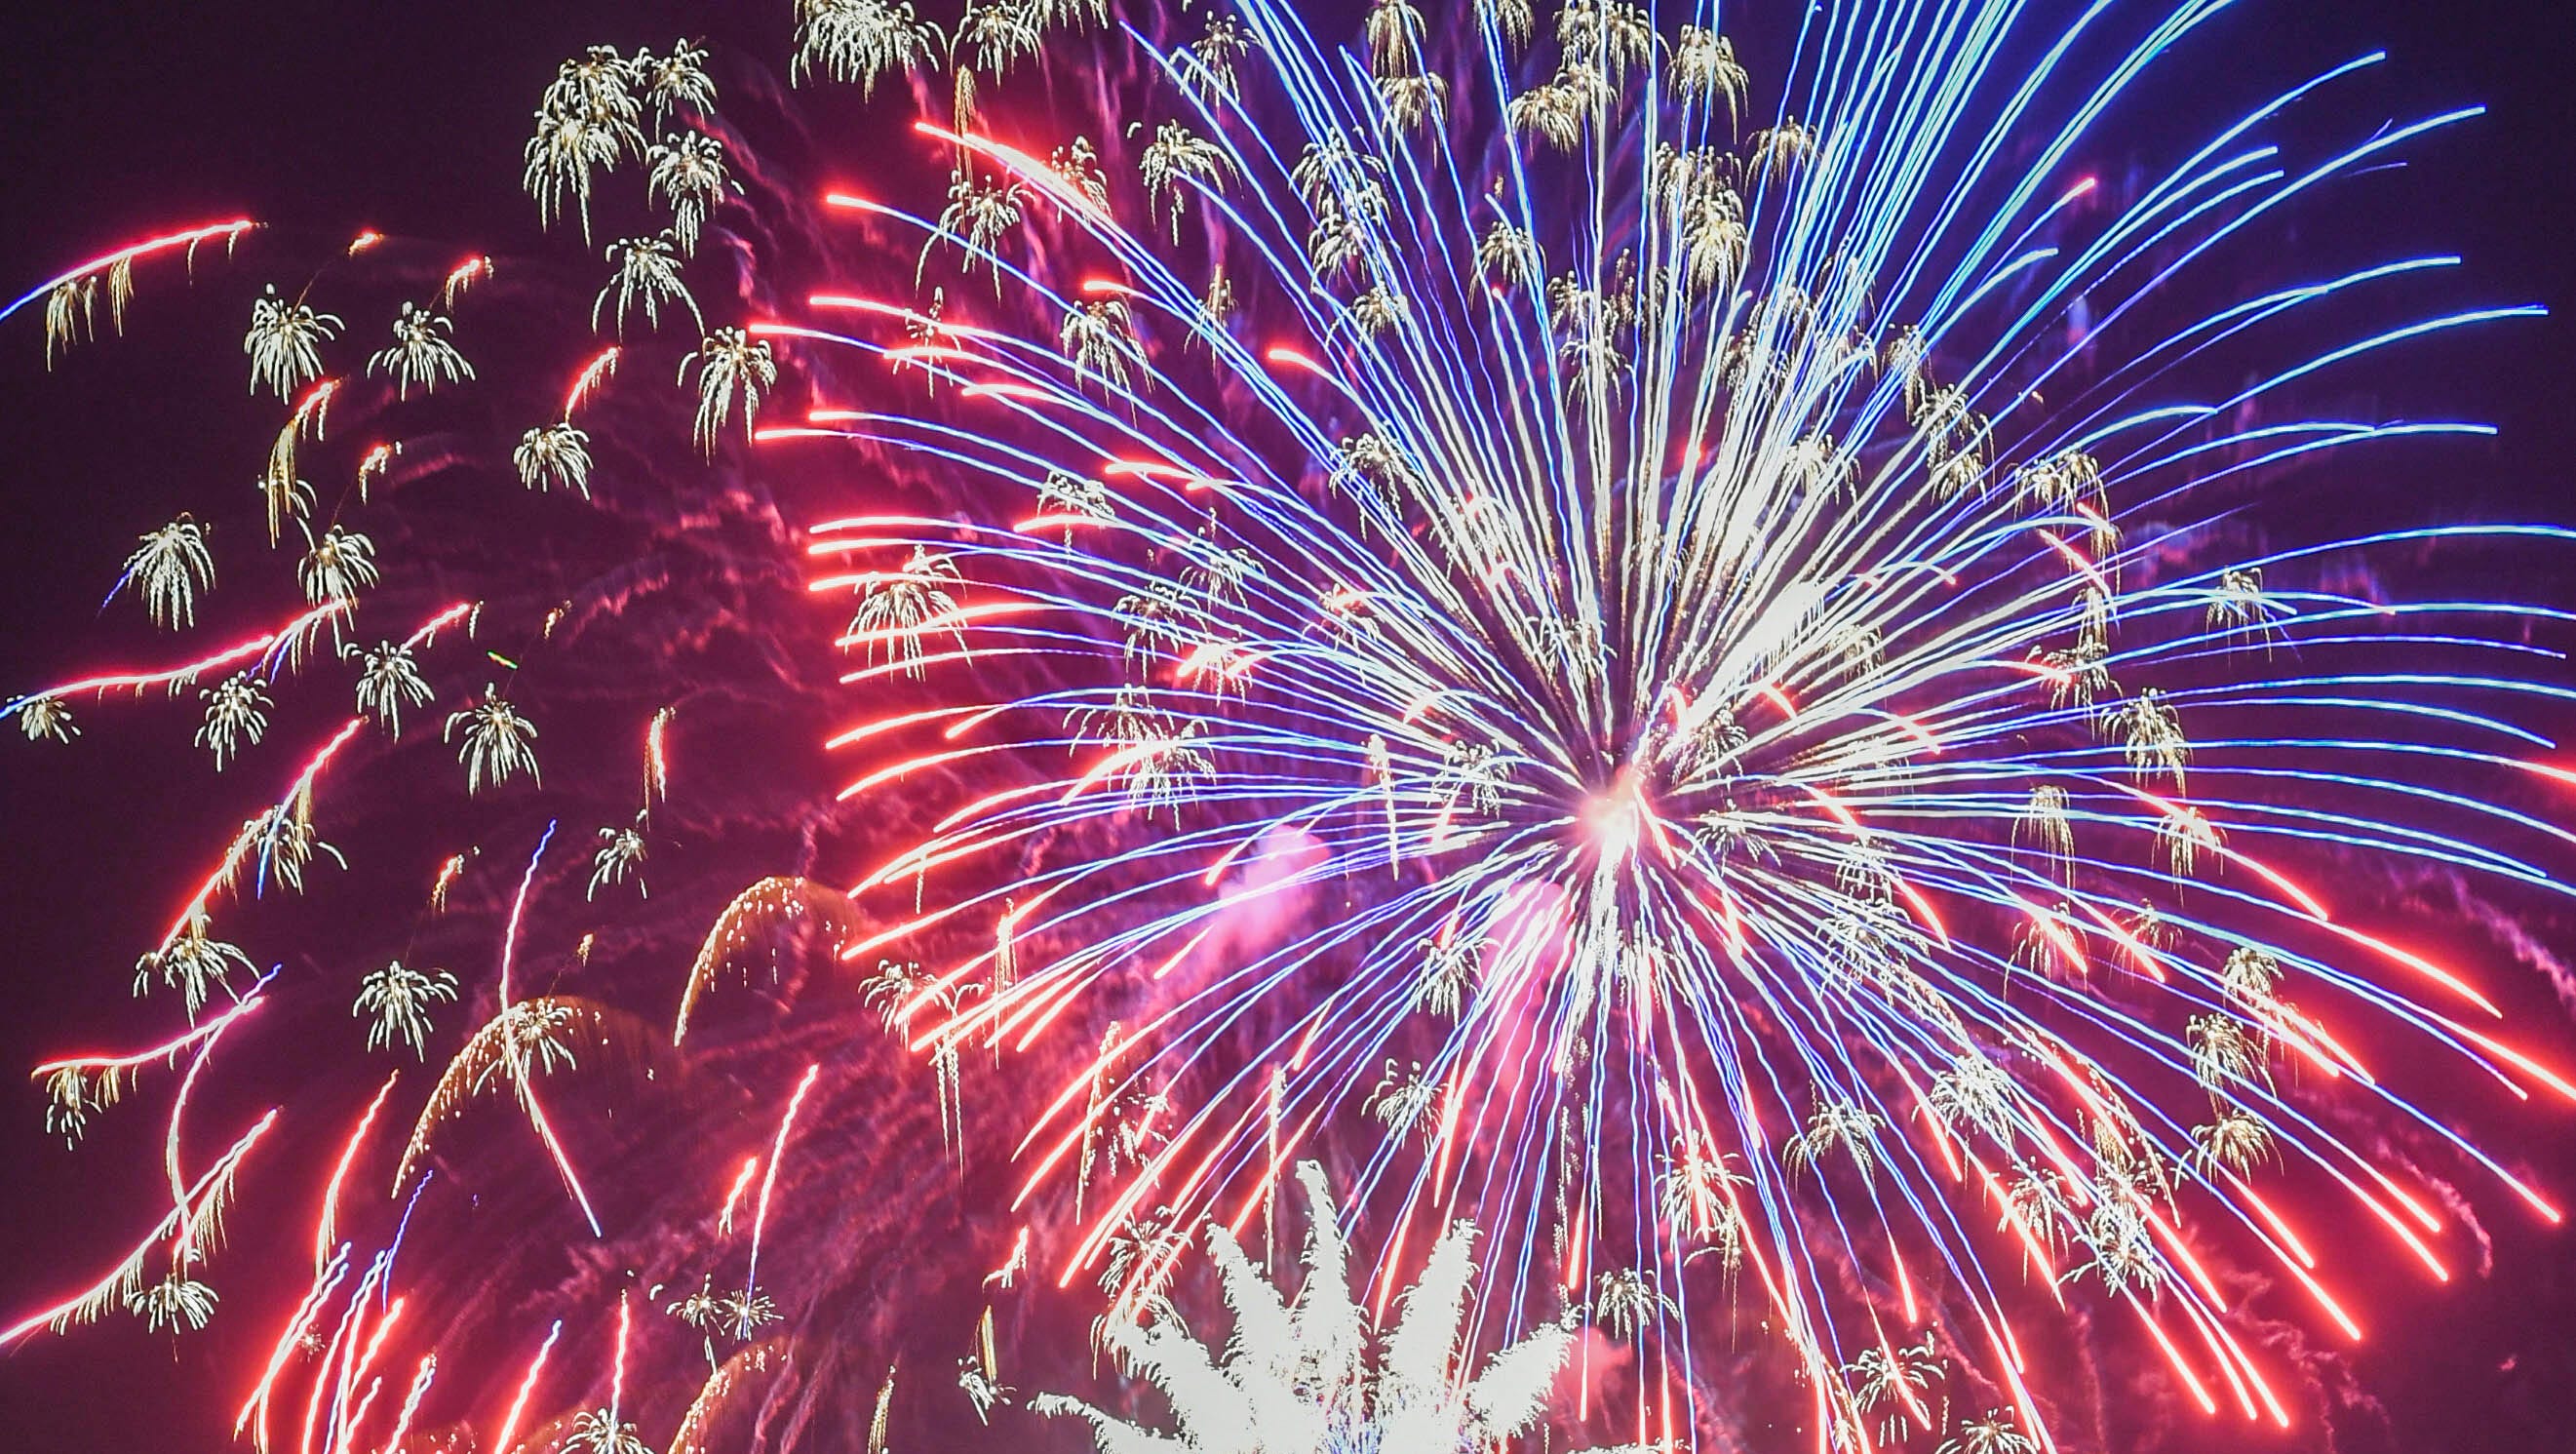 July 4th celebrations in Bucyrus, Crestline will include fireworks